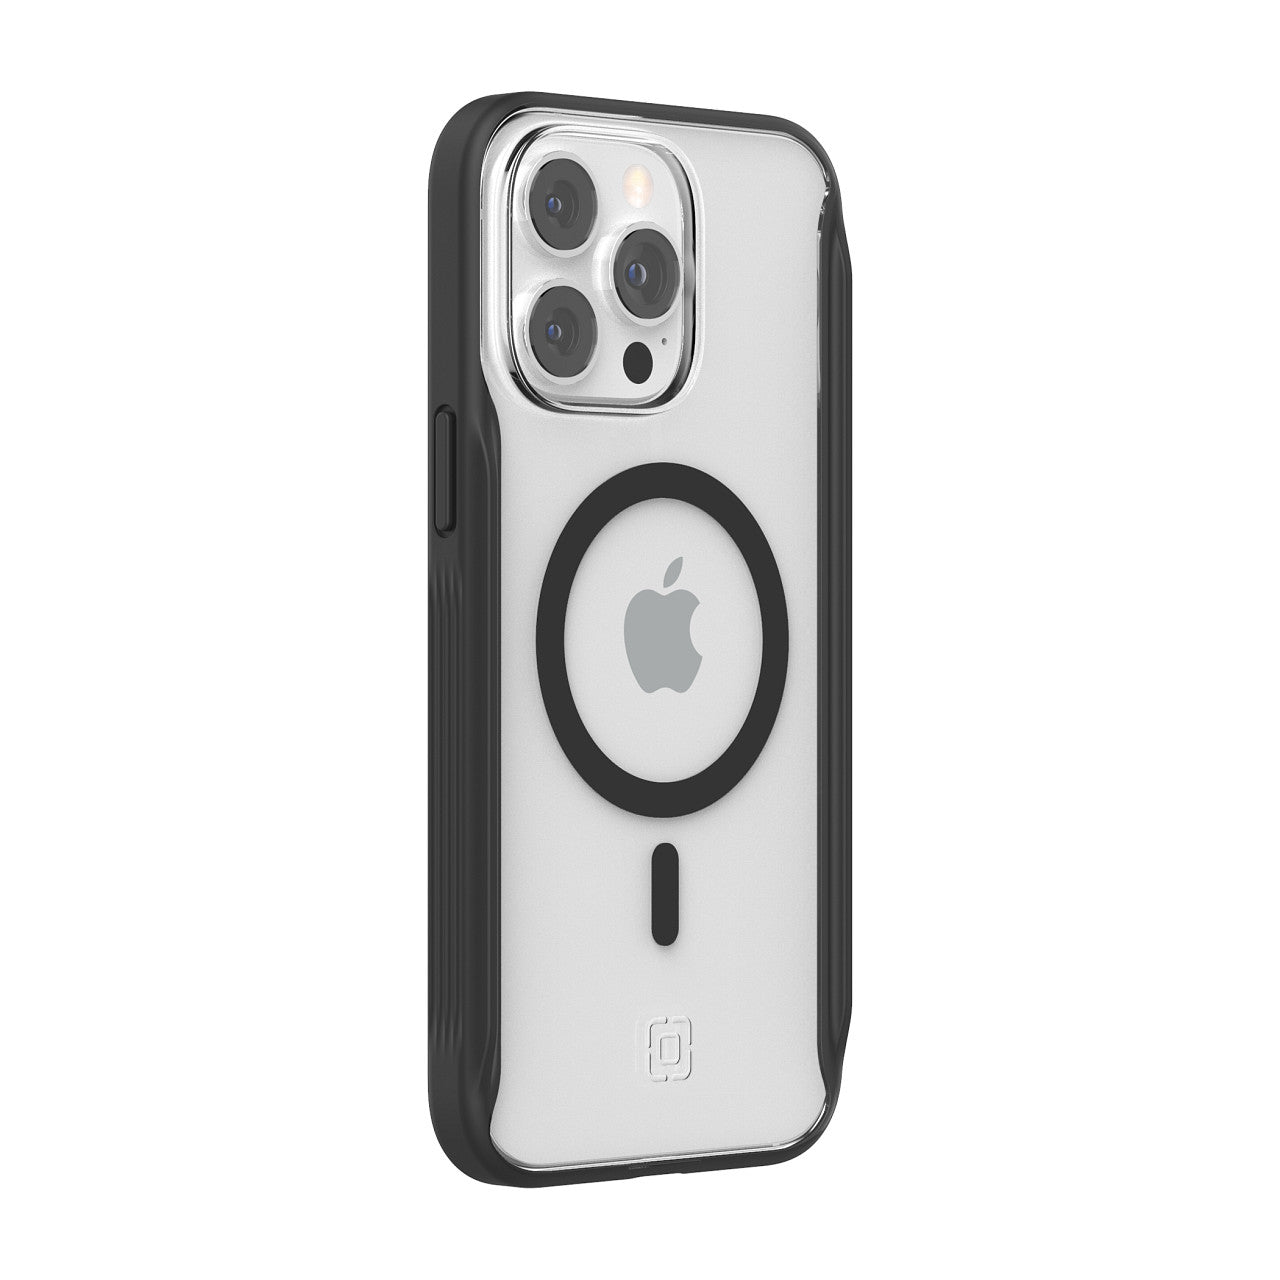 Camera Protection] Simtect Designed for iPhone 14 Pro Max Case with S